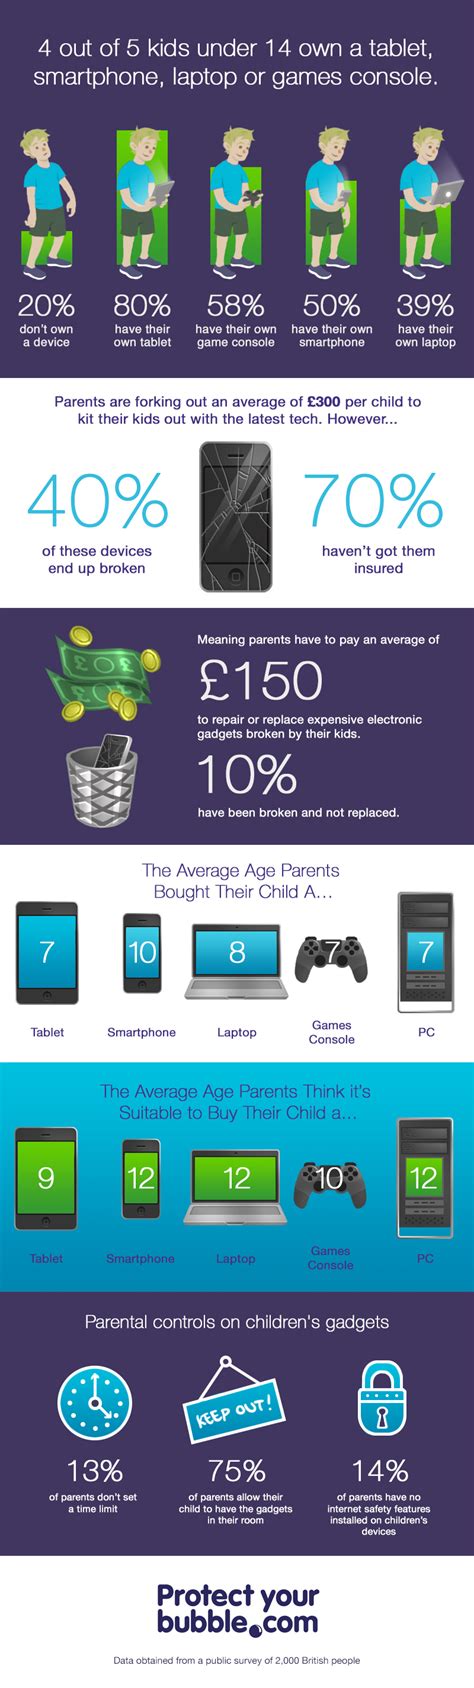 Surname, phone number, bank details) as your question will be. Children's Gadgets Insurance Survey